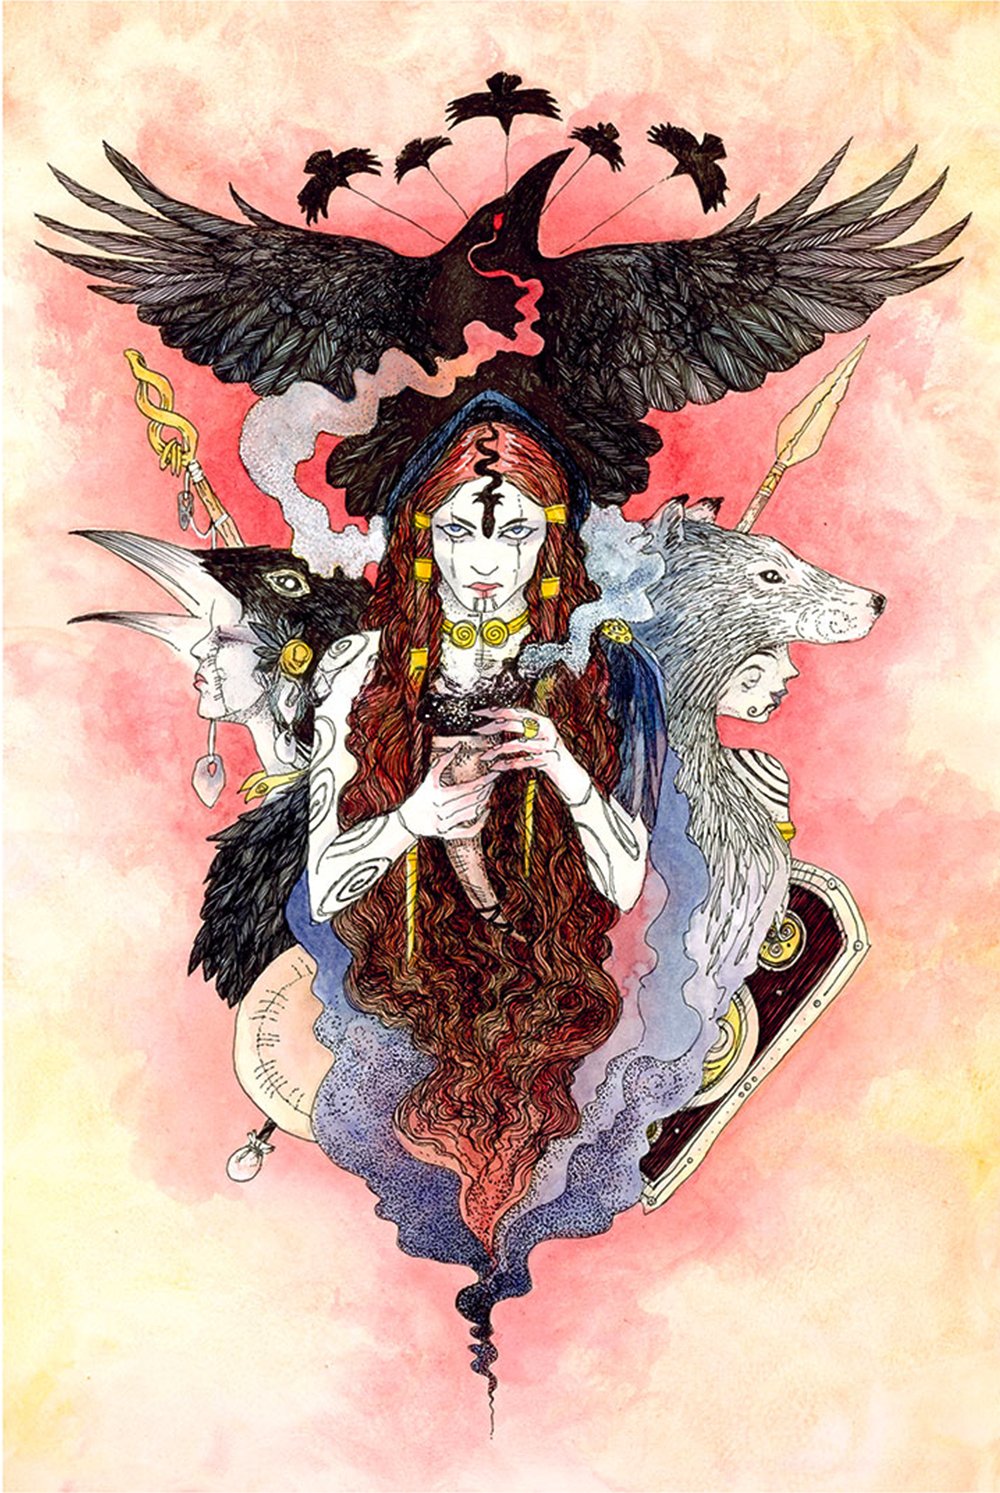 An illustration of a woman with long flowing red hair, surrounded by various animals and objects. The woman is holding a white horn in her hands. There is a black bird above her head, a crow on her right and a bear on her left. The background is pink. The overall mood of the image is mystical and surreal.